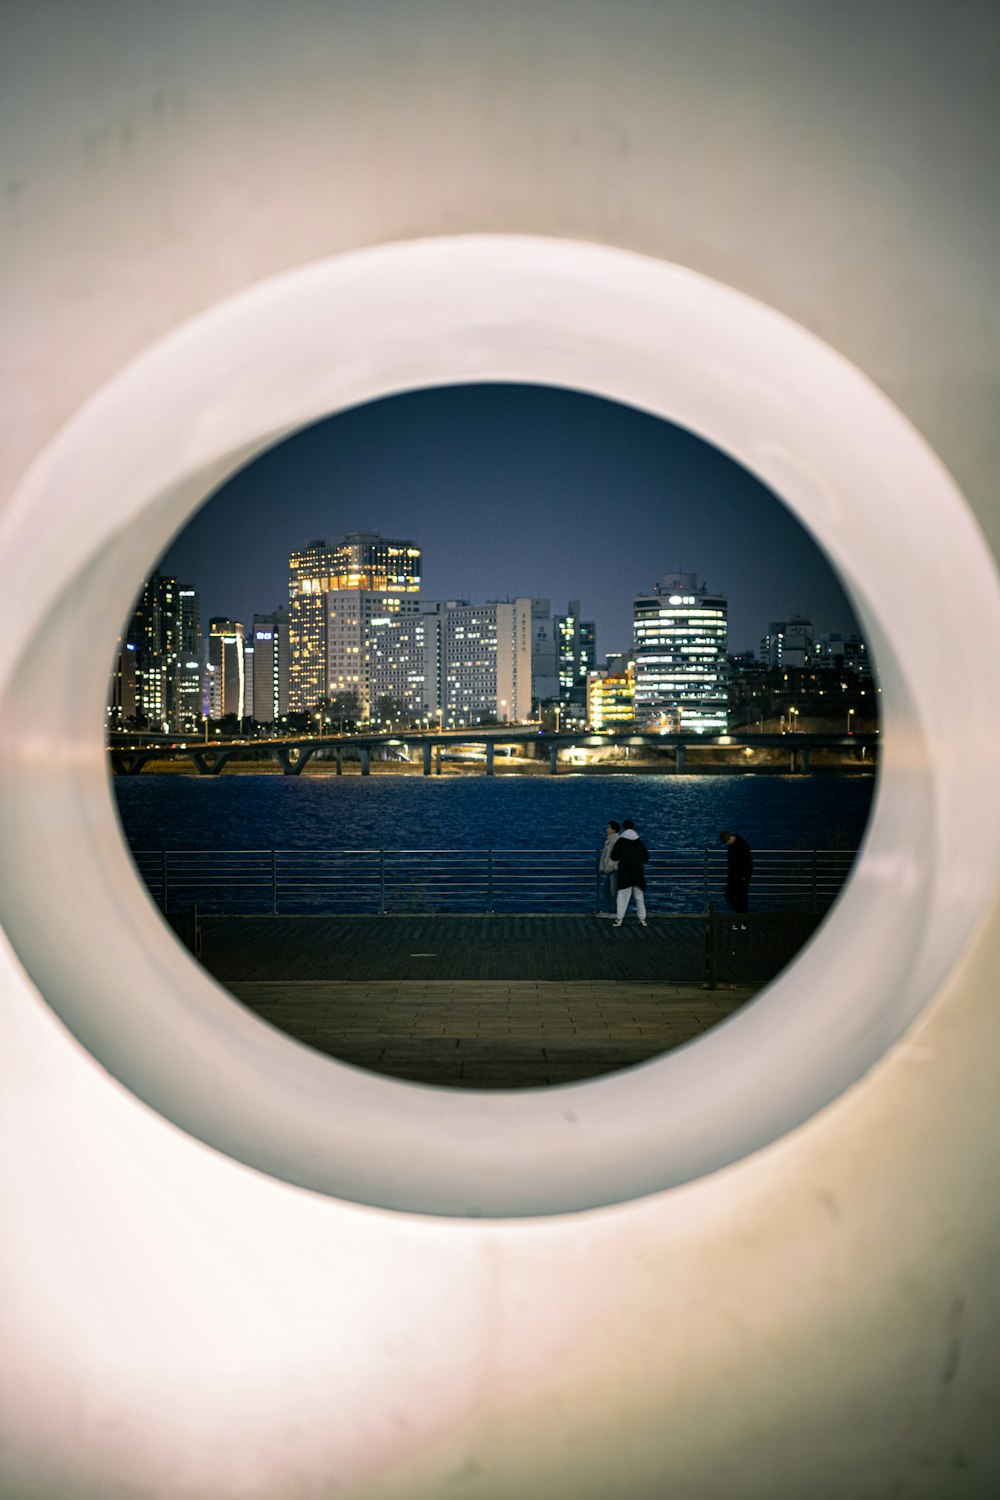 a view of a city from a circular object